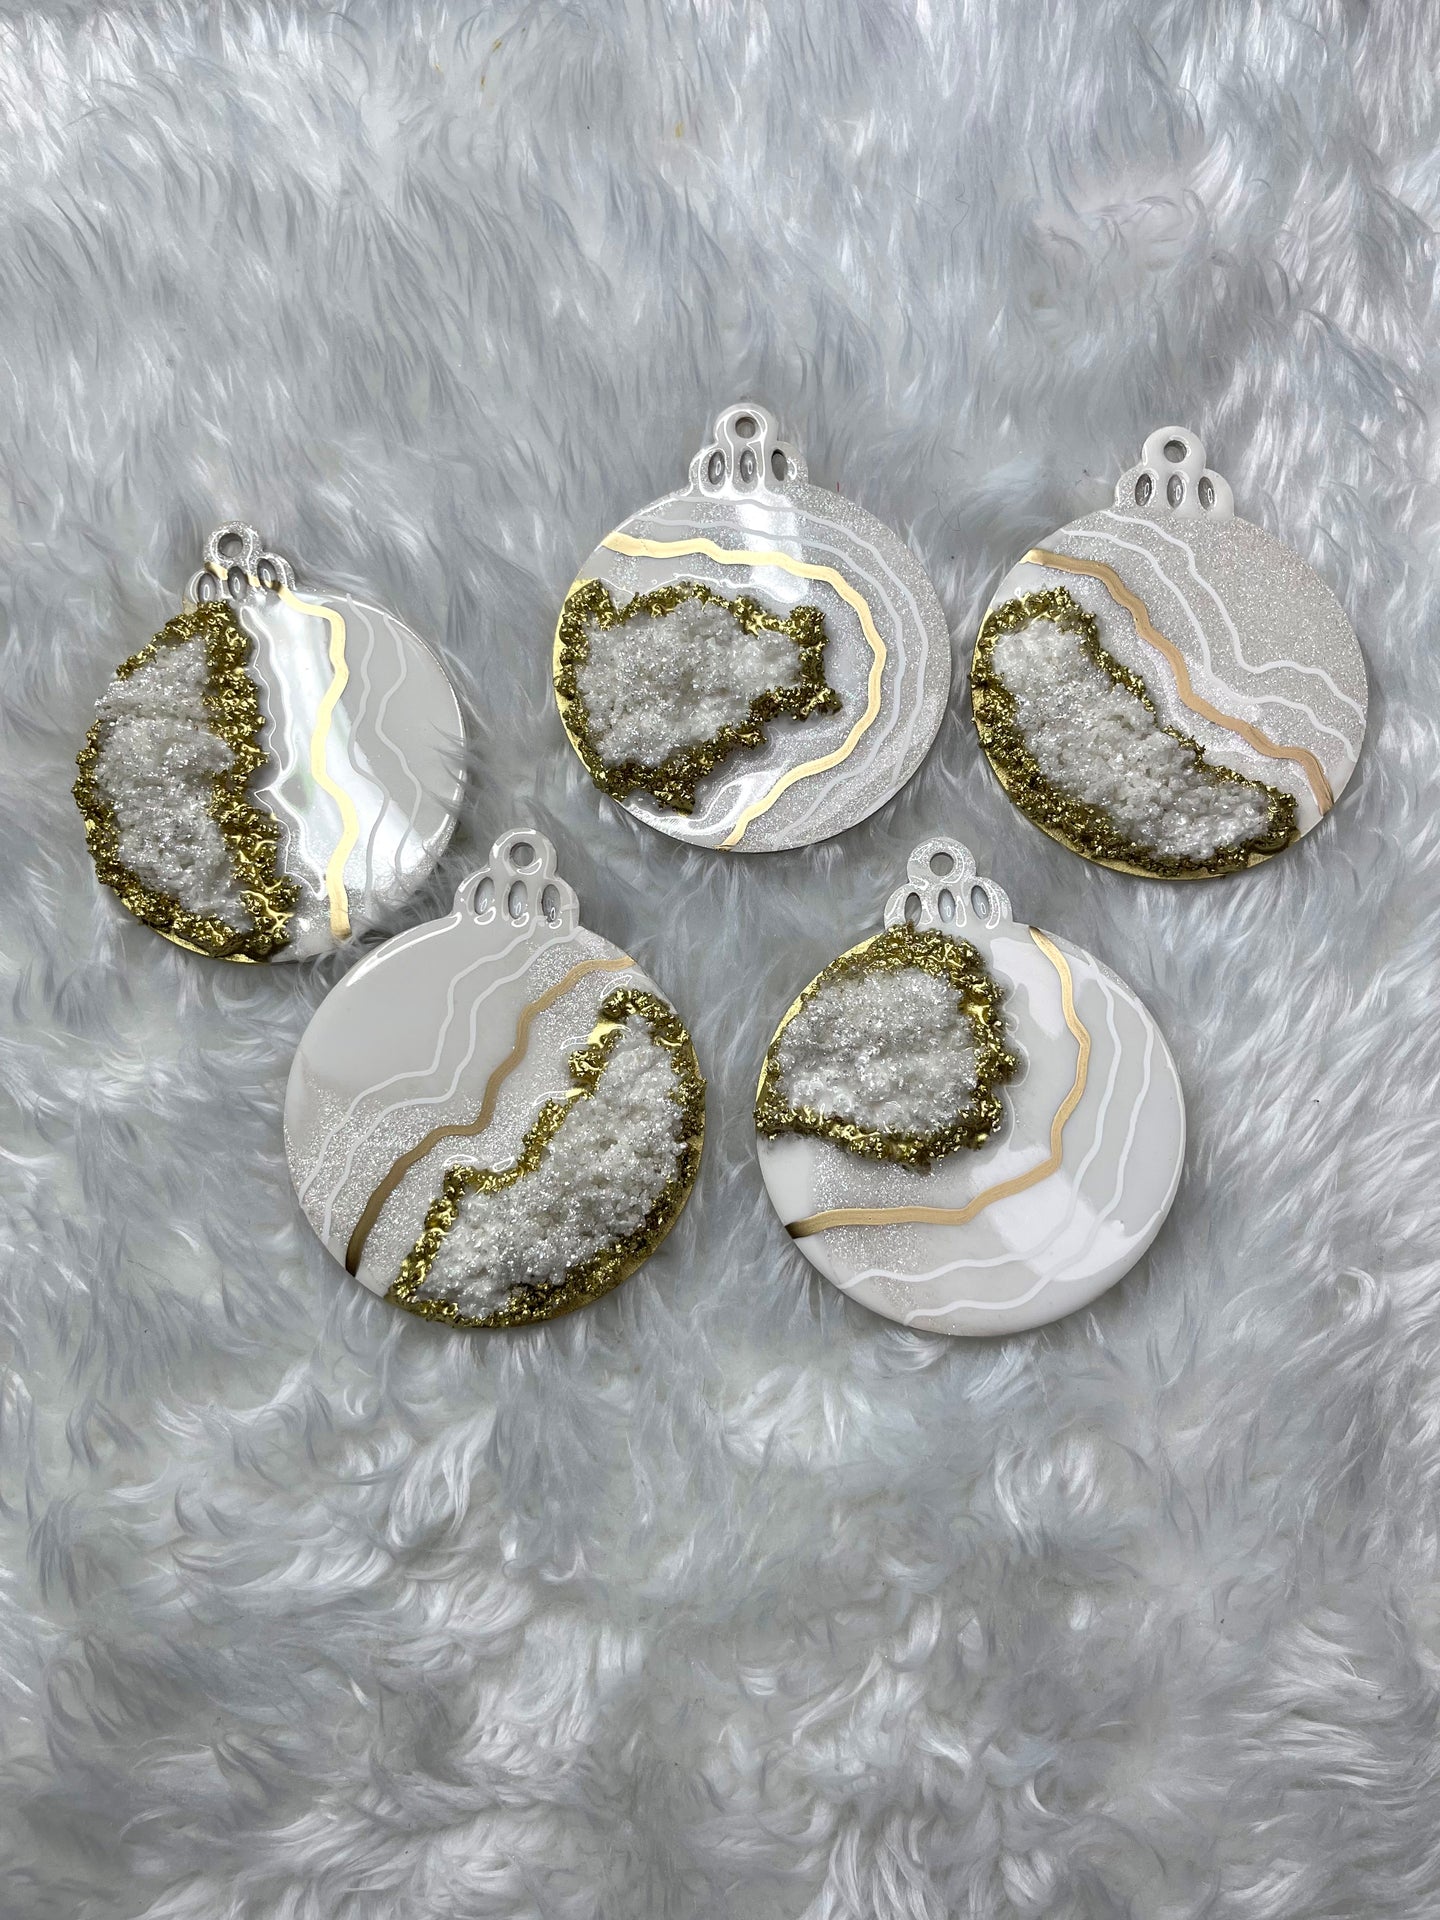 Luxe Geode Ornaments - 5 Count Set: Gold & White